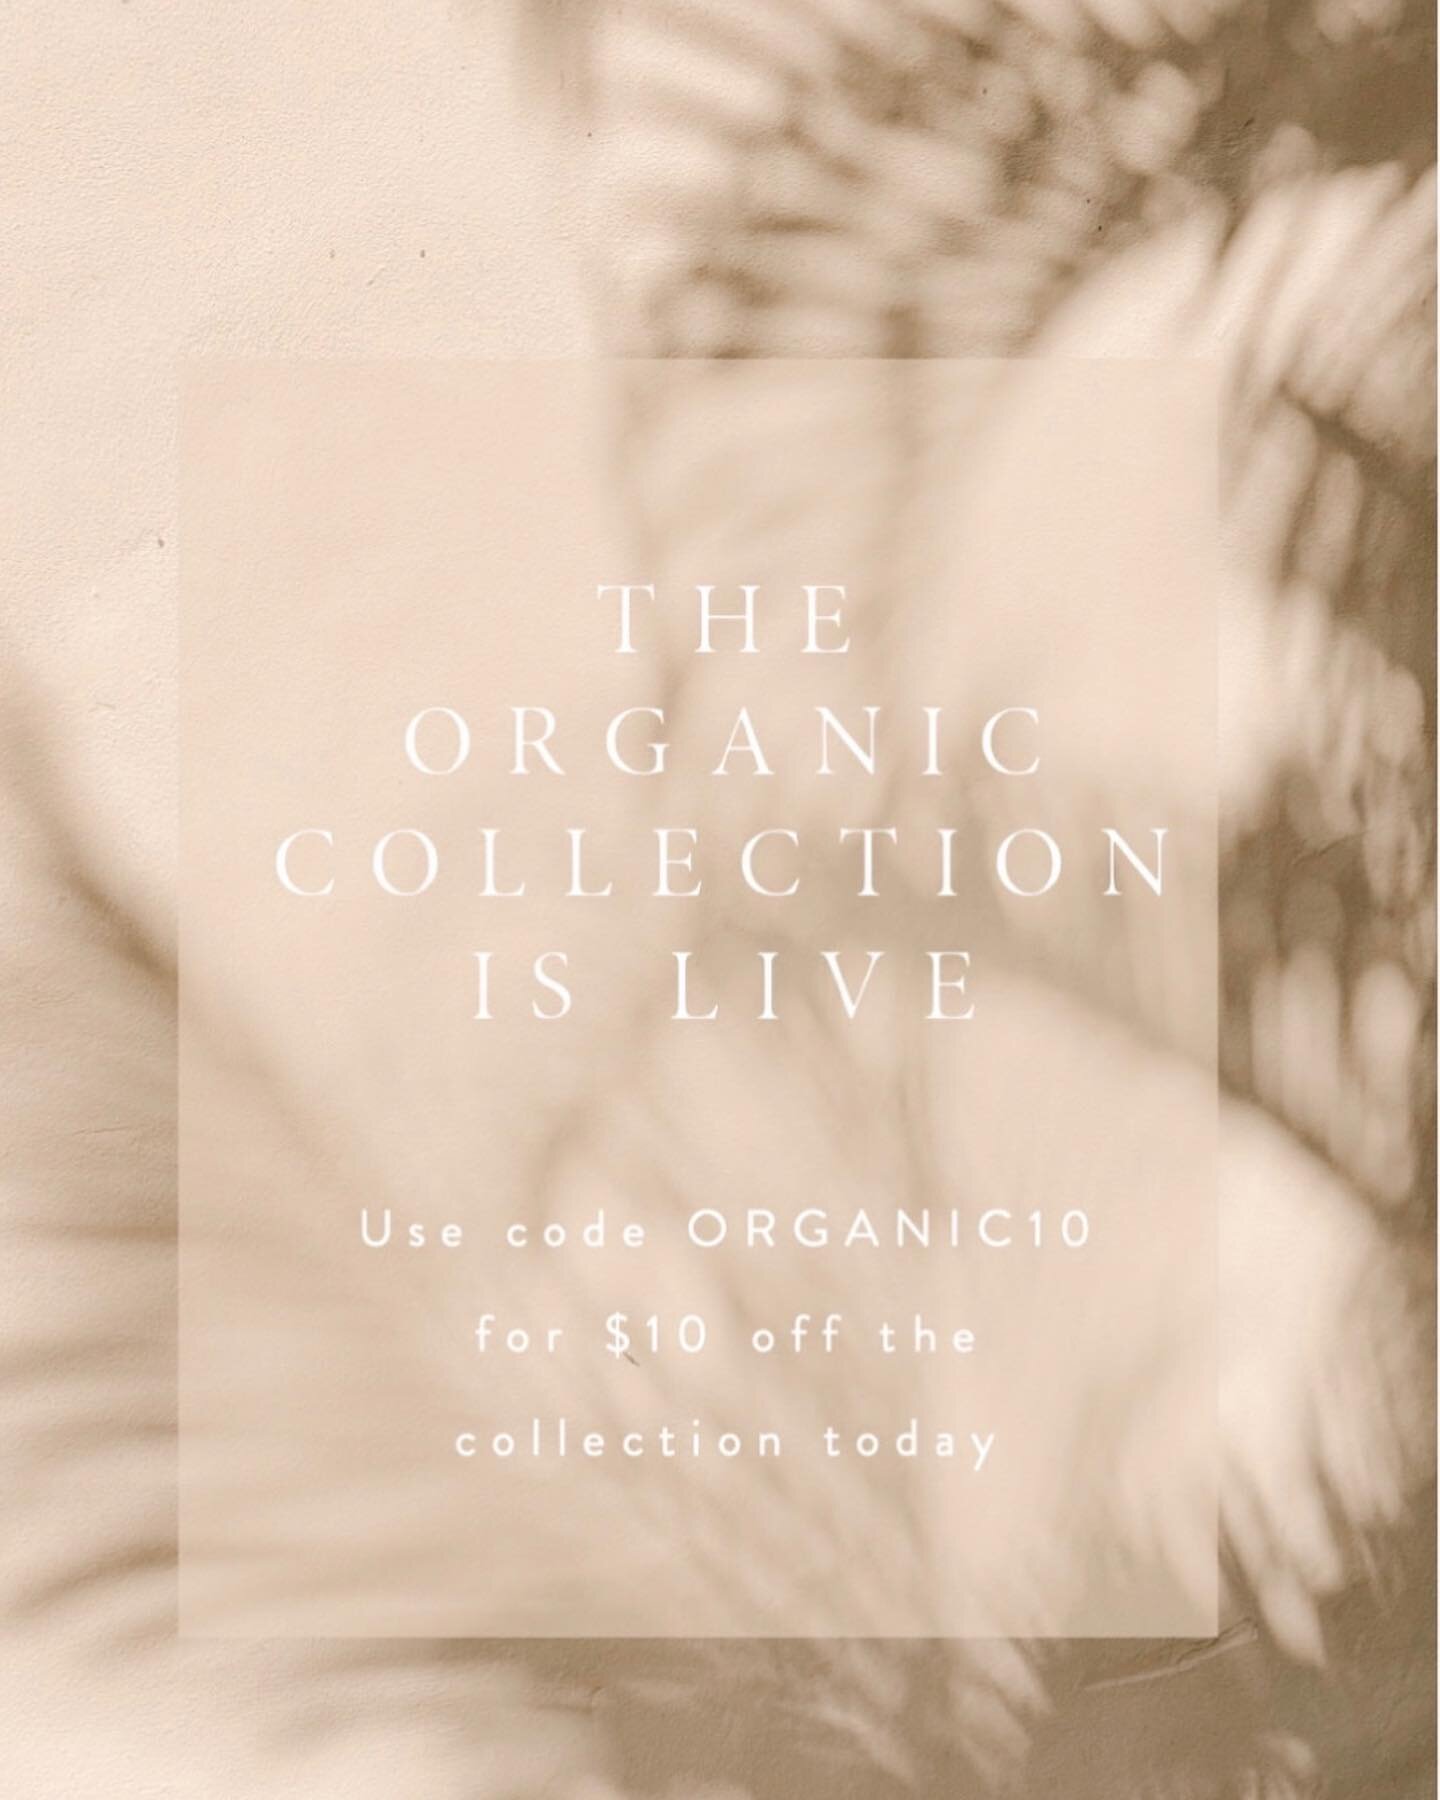 My new presets are here! The Organic Collection is a timeless and natural collection with creamy soft undertones. It includes 7 presets&mdash; Salt, Almond, Honey, Milk, Oat, Organic &amp; Pepper. Each preset is designed to be used together as a set 